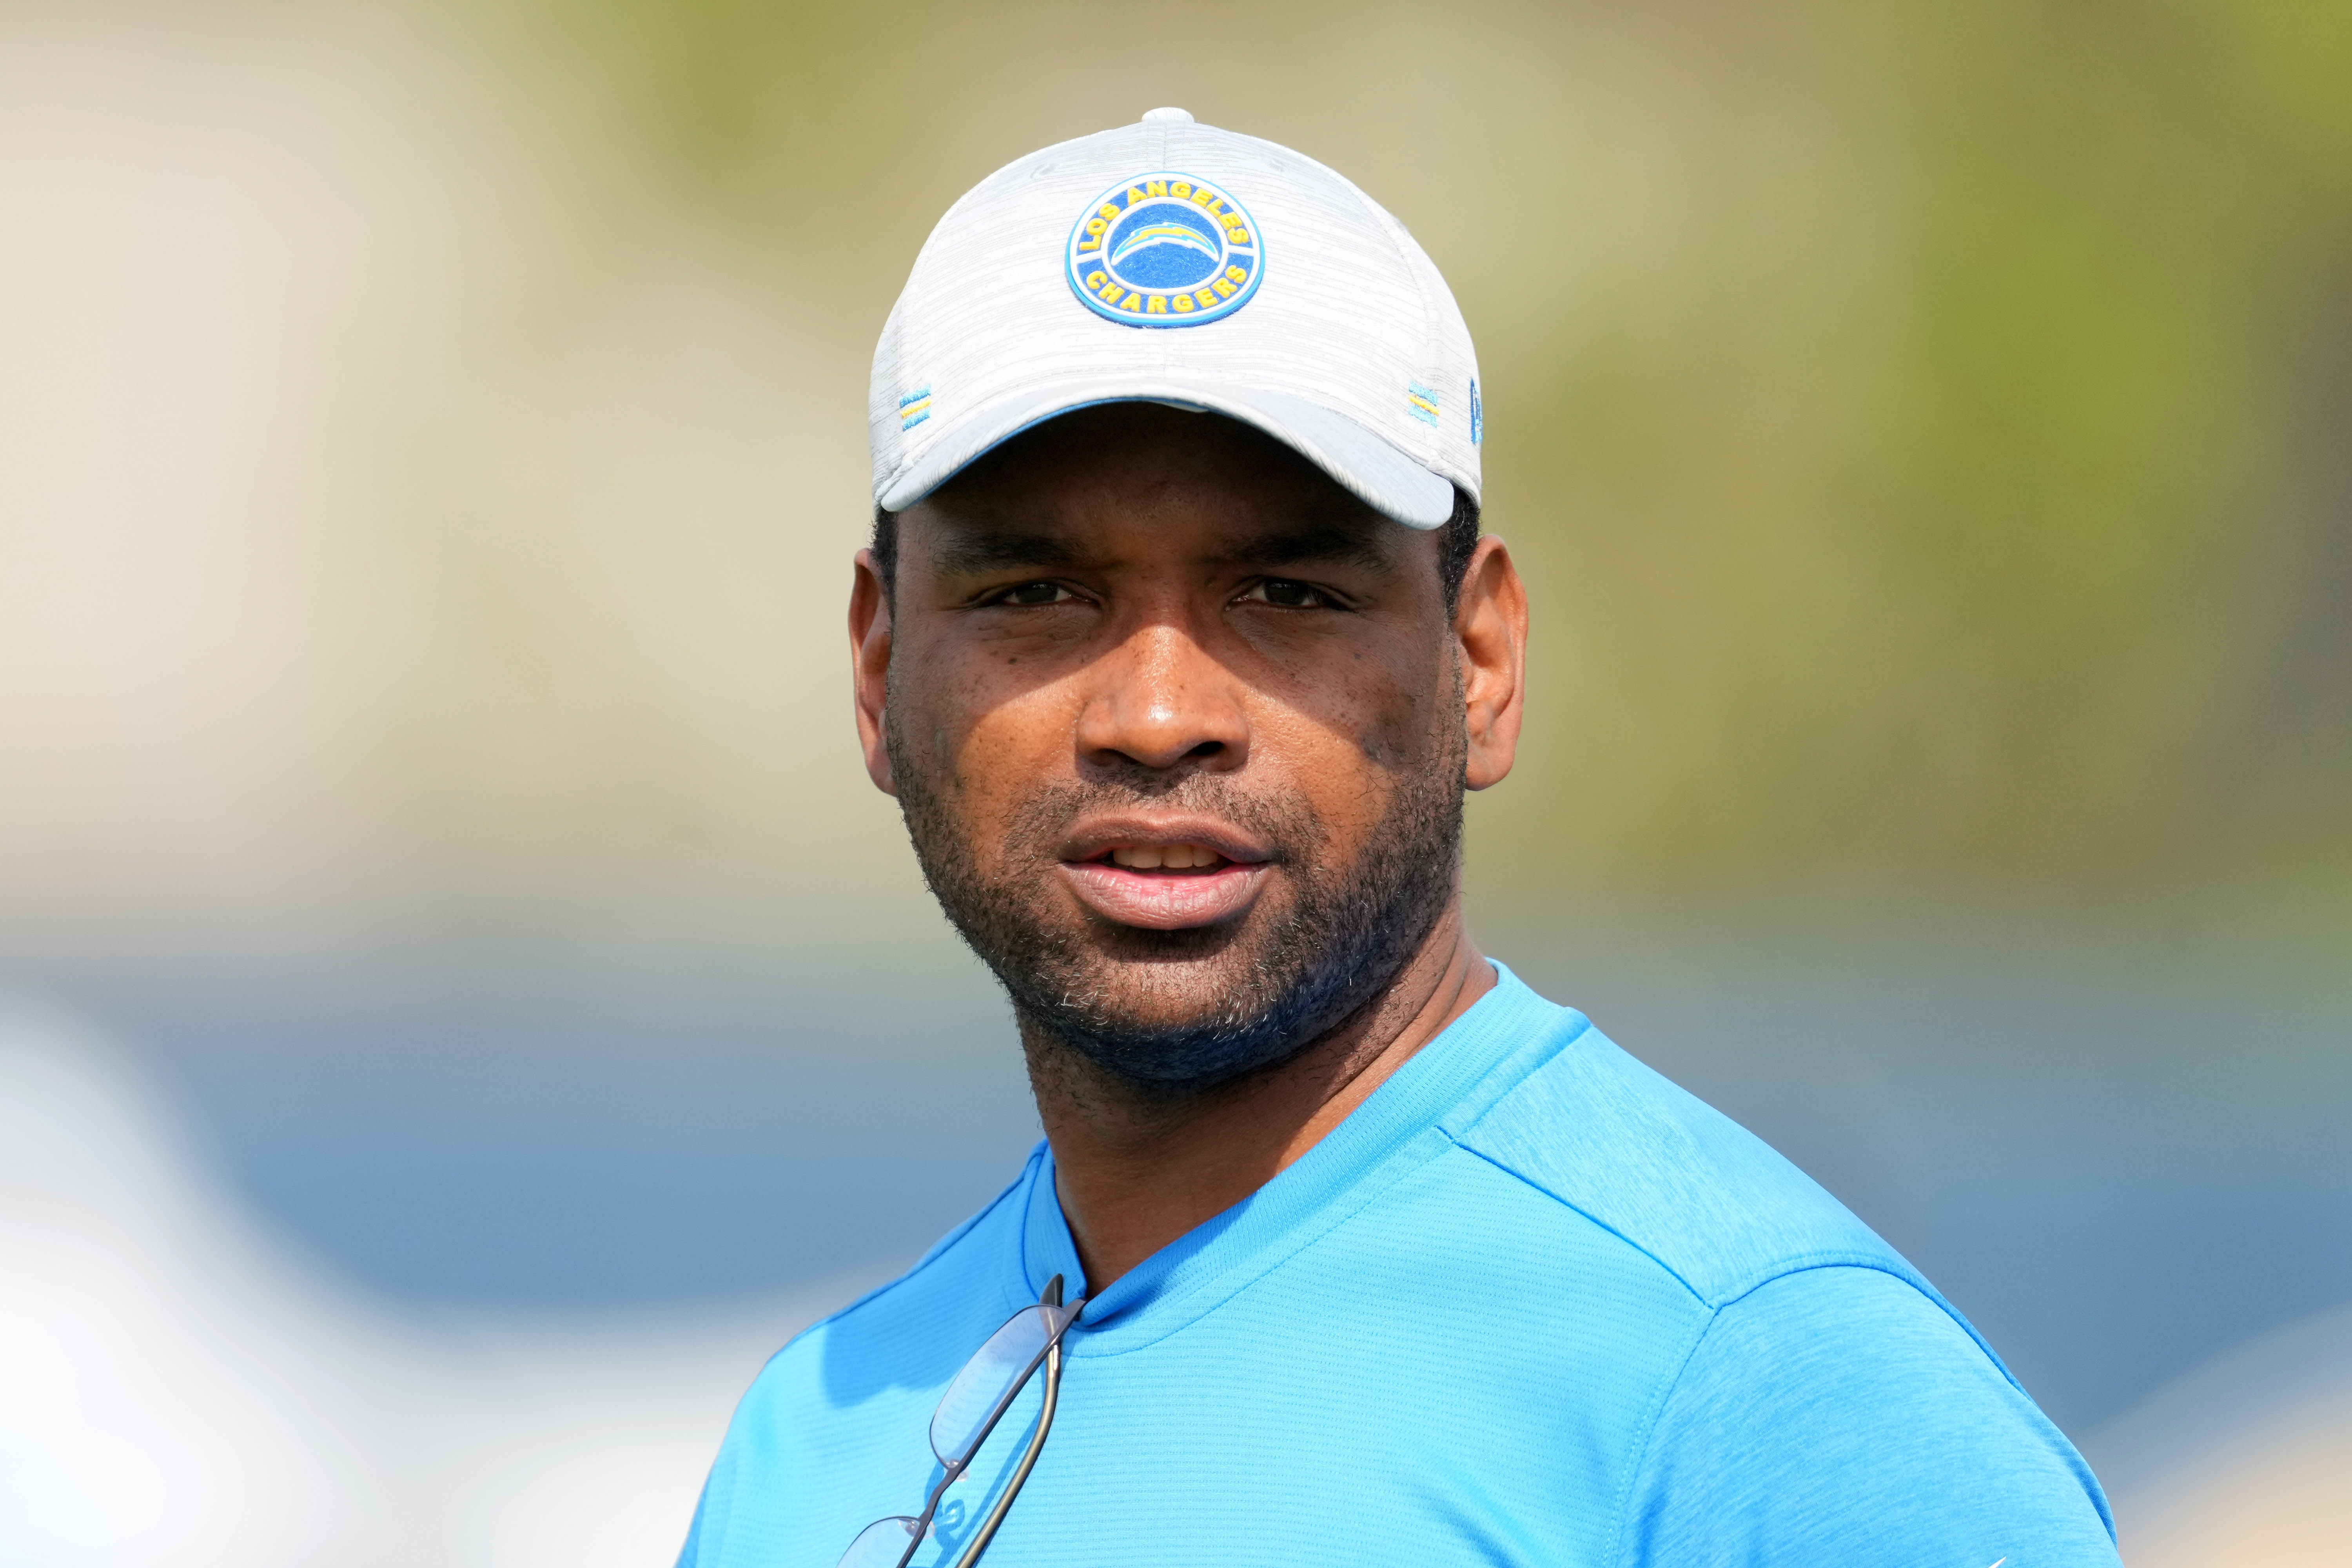 Jun 15, 2021; Costa Mesa, CA, USA; Los Angeles Chargers director of player personnel JoJo Wooden during minicamp at the Hoag Performance Center. Mandatory Credit: Kirby Lee-USA TODAY Sports